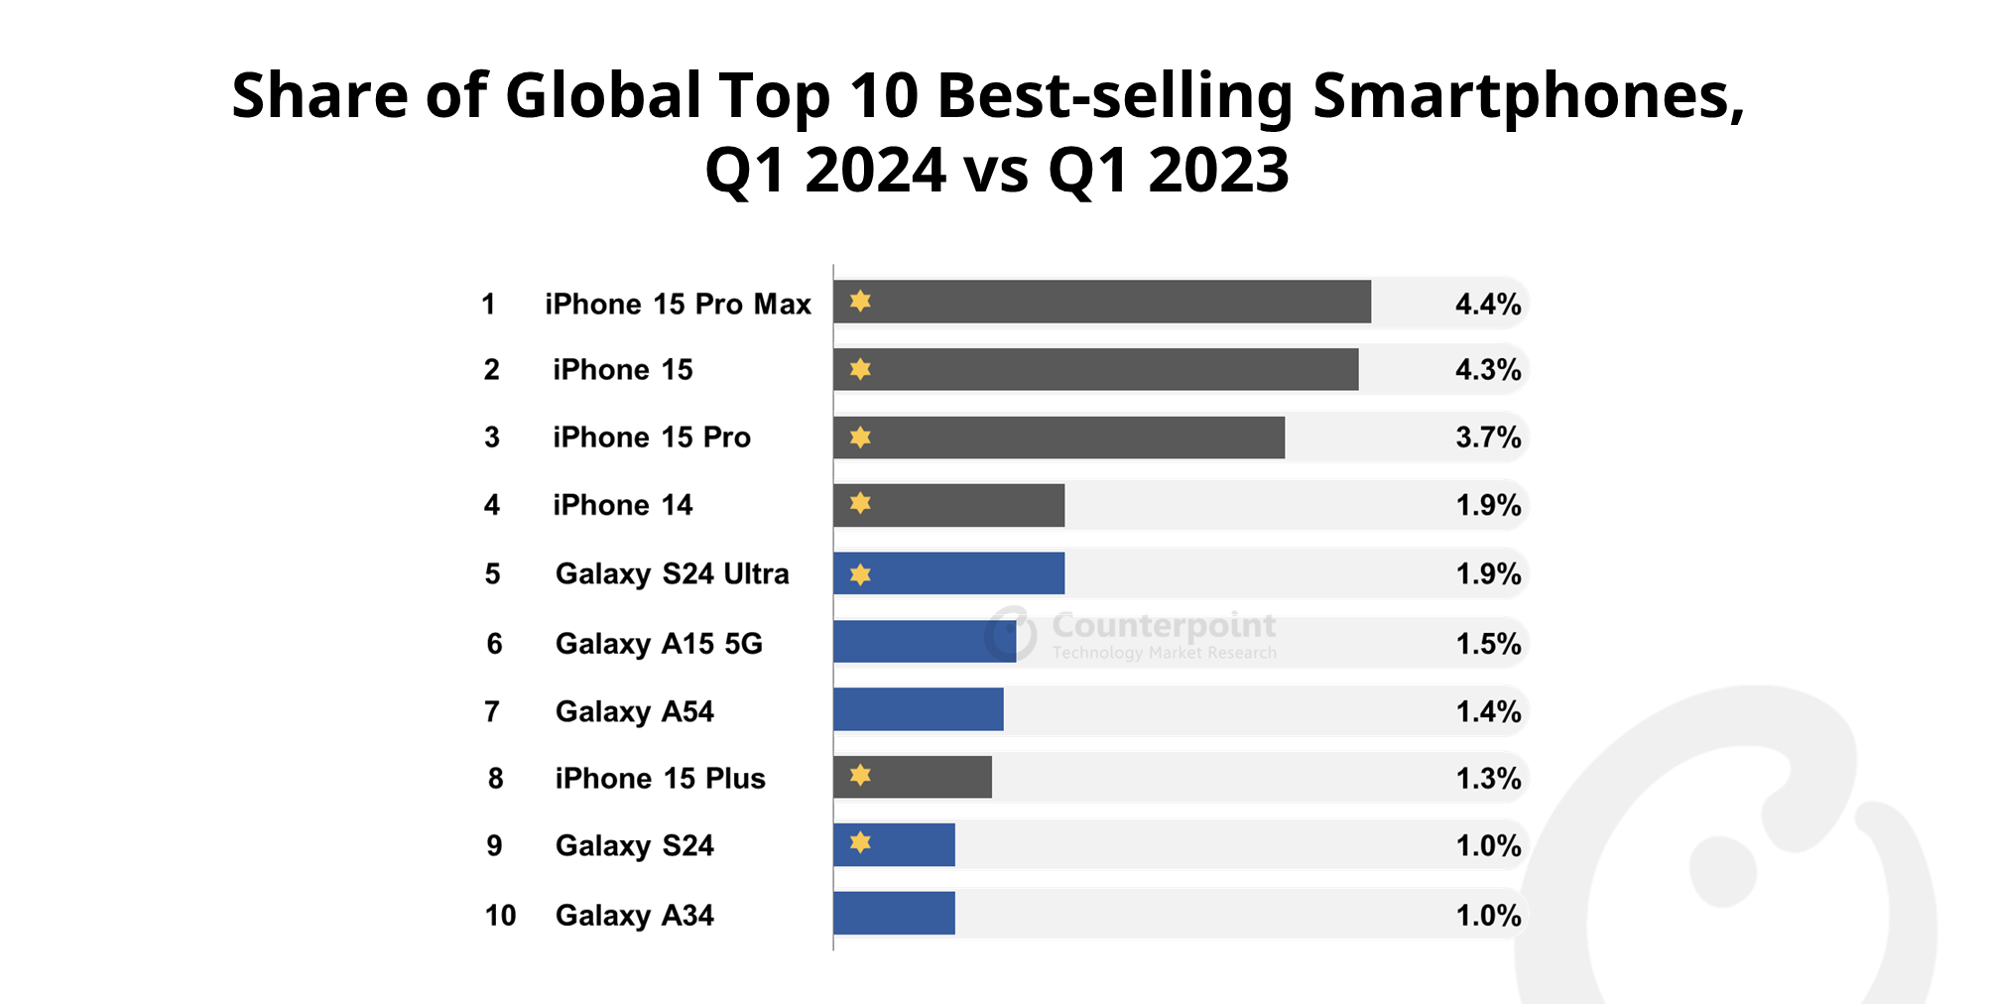 iPhone 15 Pro Max Best-selling Smartphone in Q1 2024